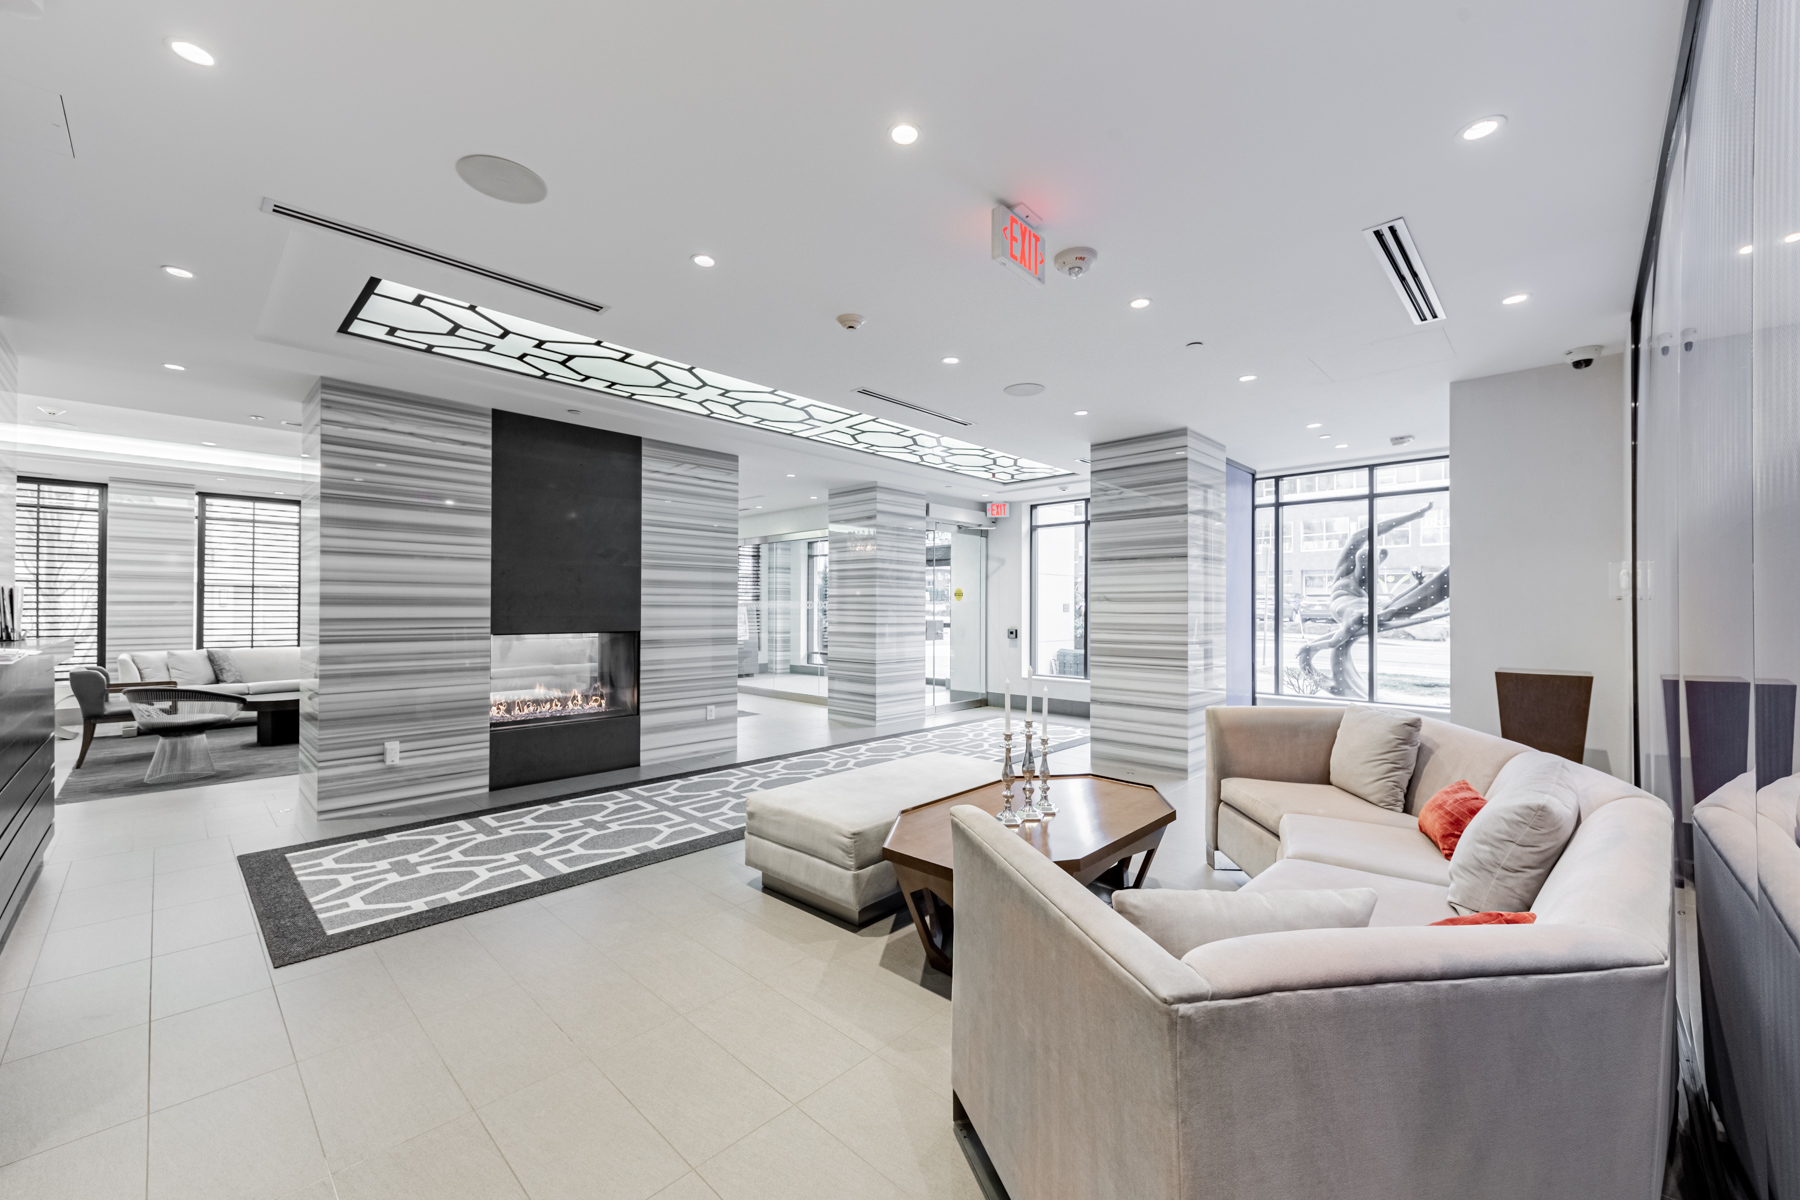 Condo lobby with gray walls, floors and ceiling, plus modern furniture and fireplace.